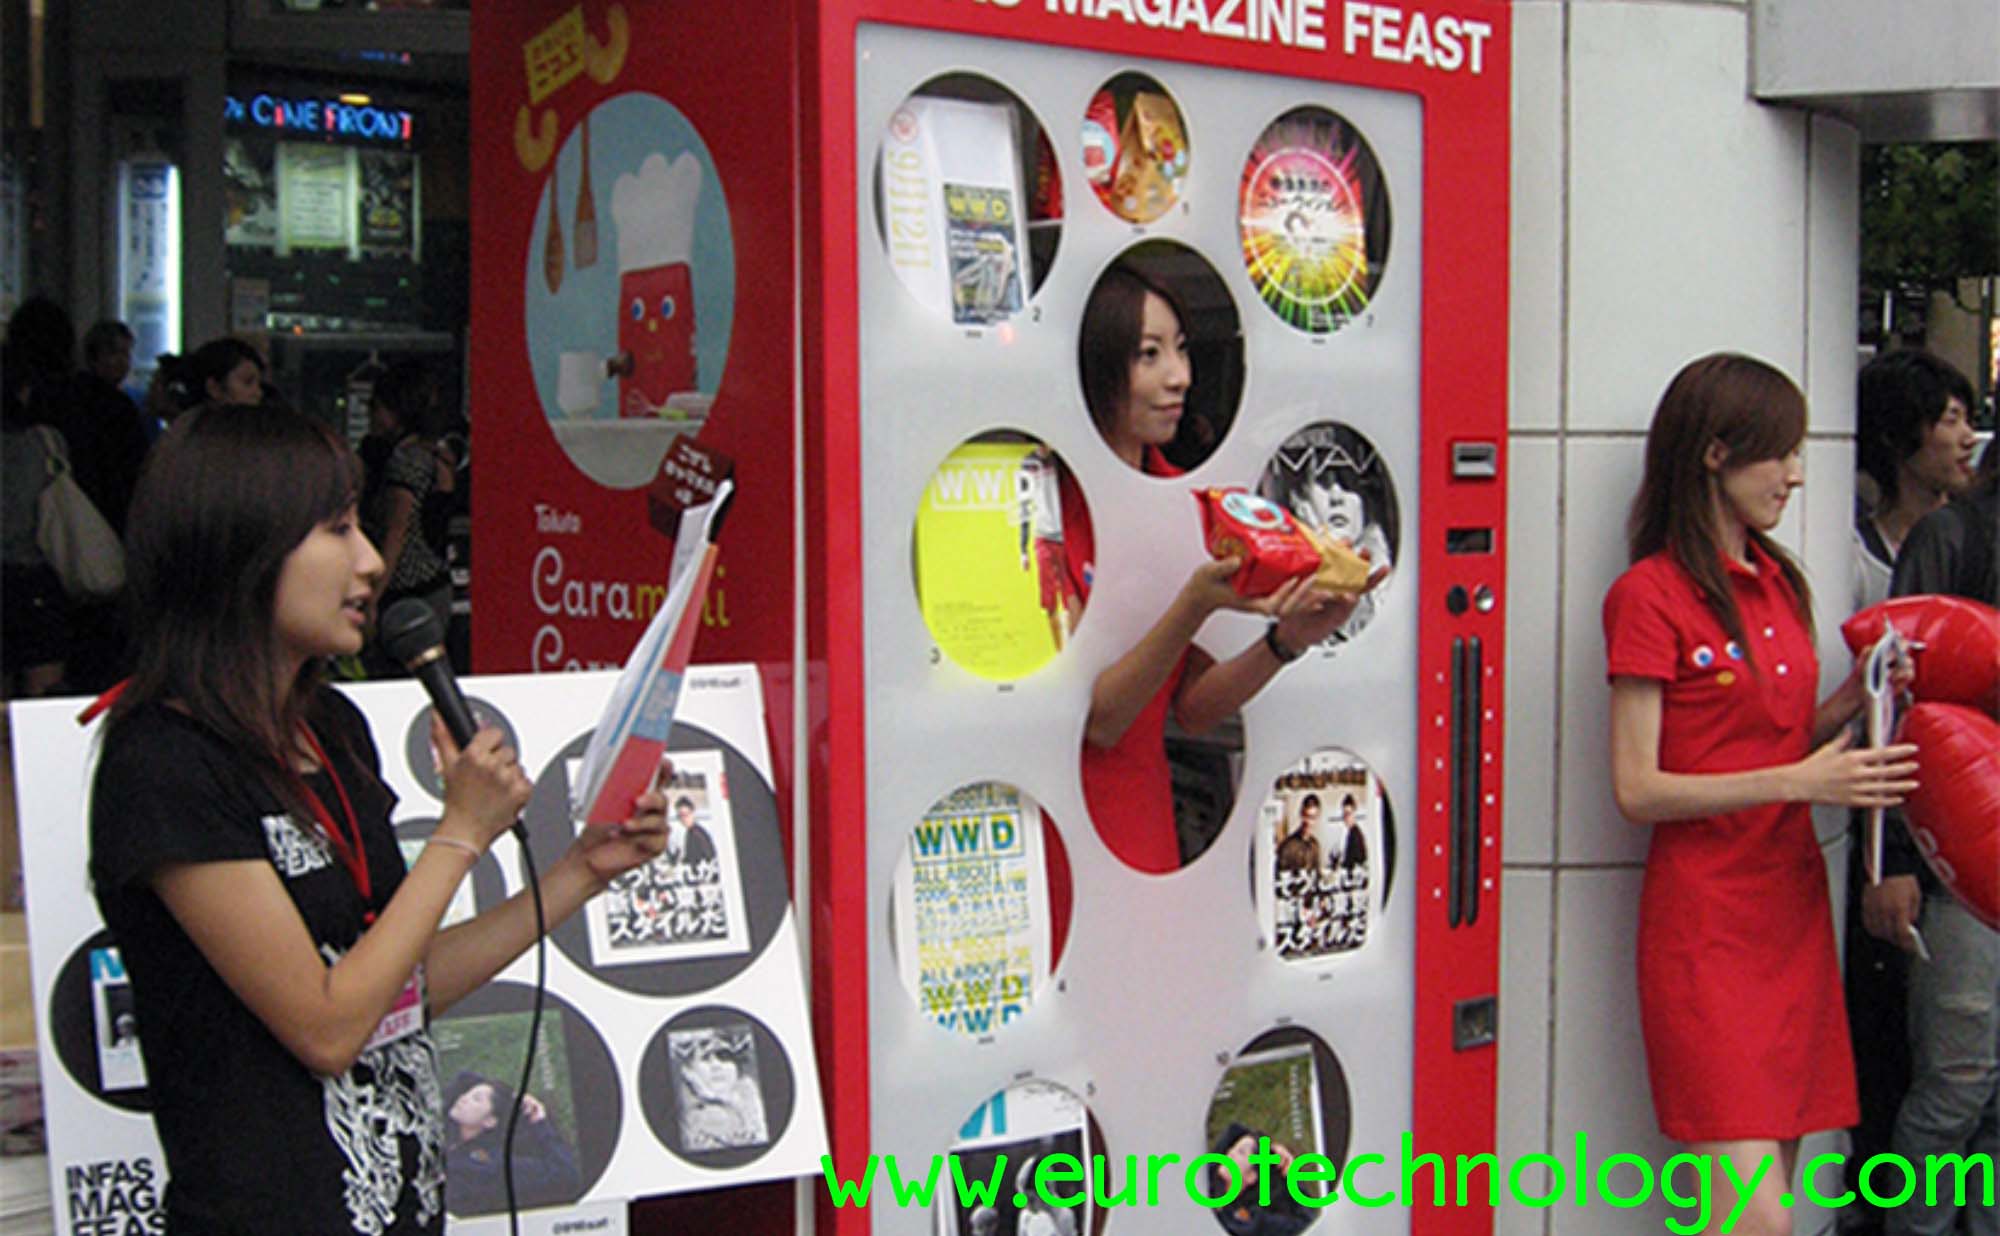 Human vending machine in Tokyo Catching attention on the world’s most busy crossing: Shibuya Hachiko